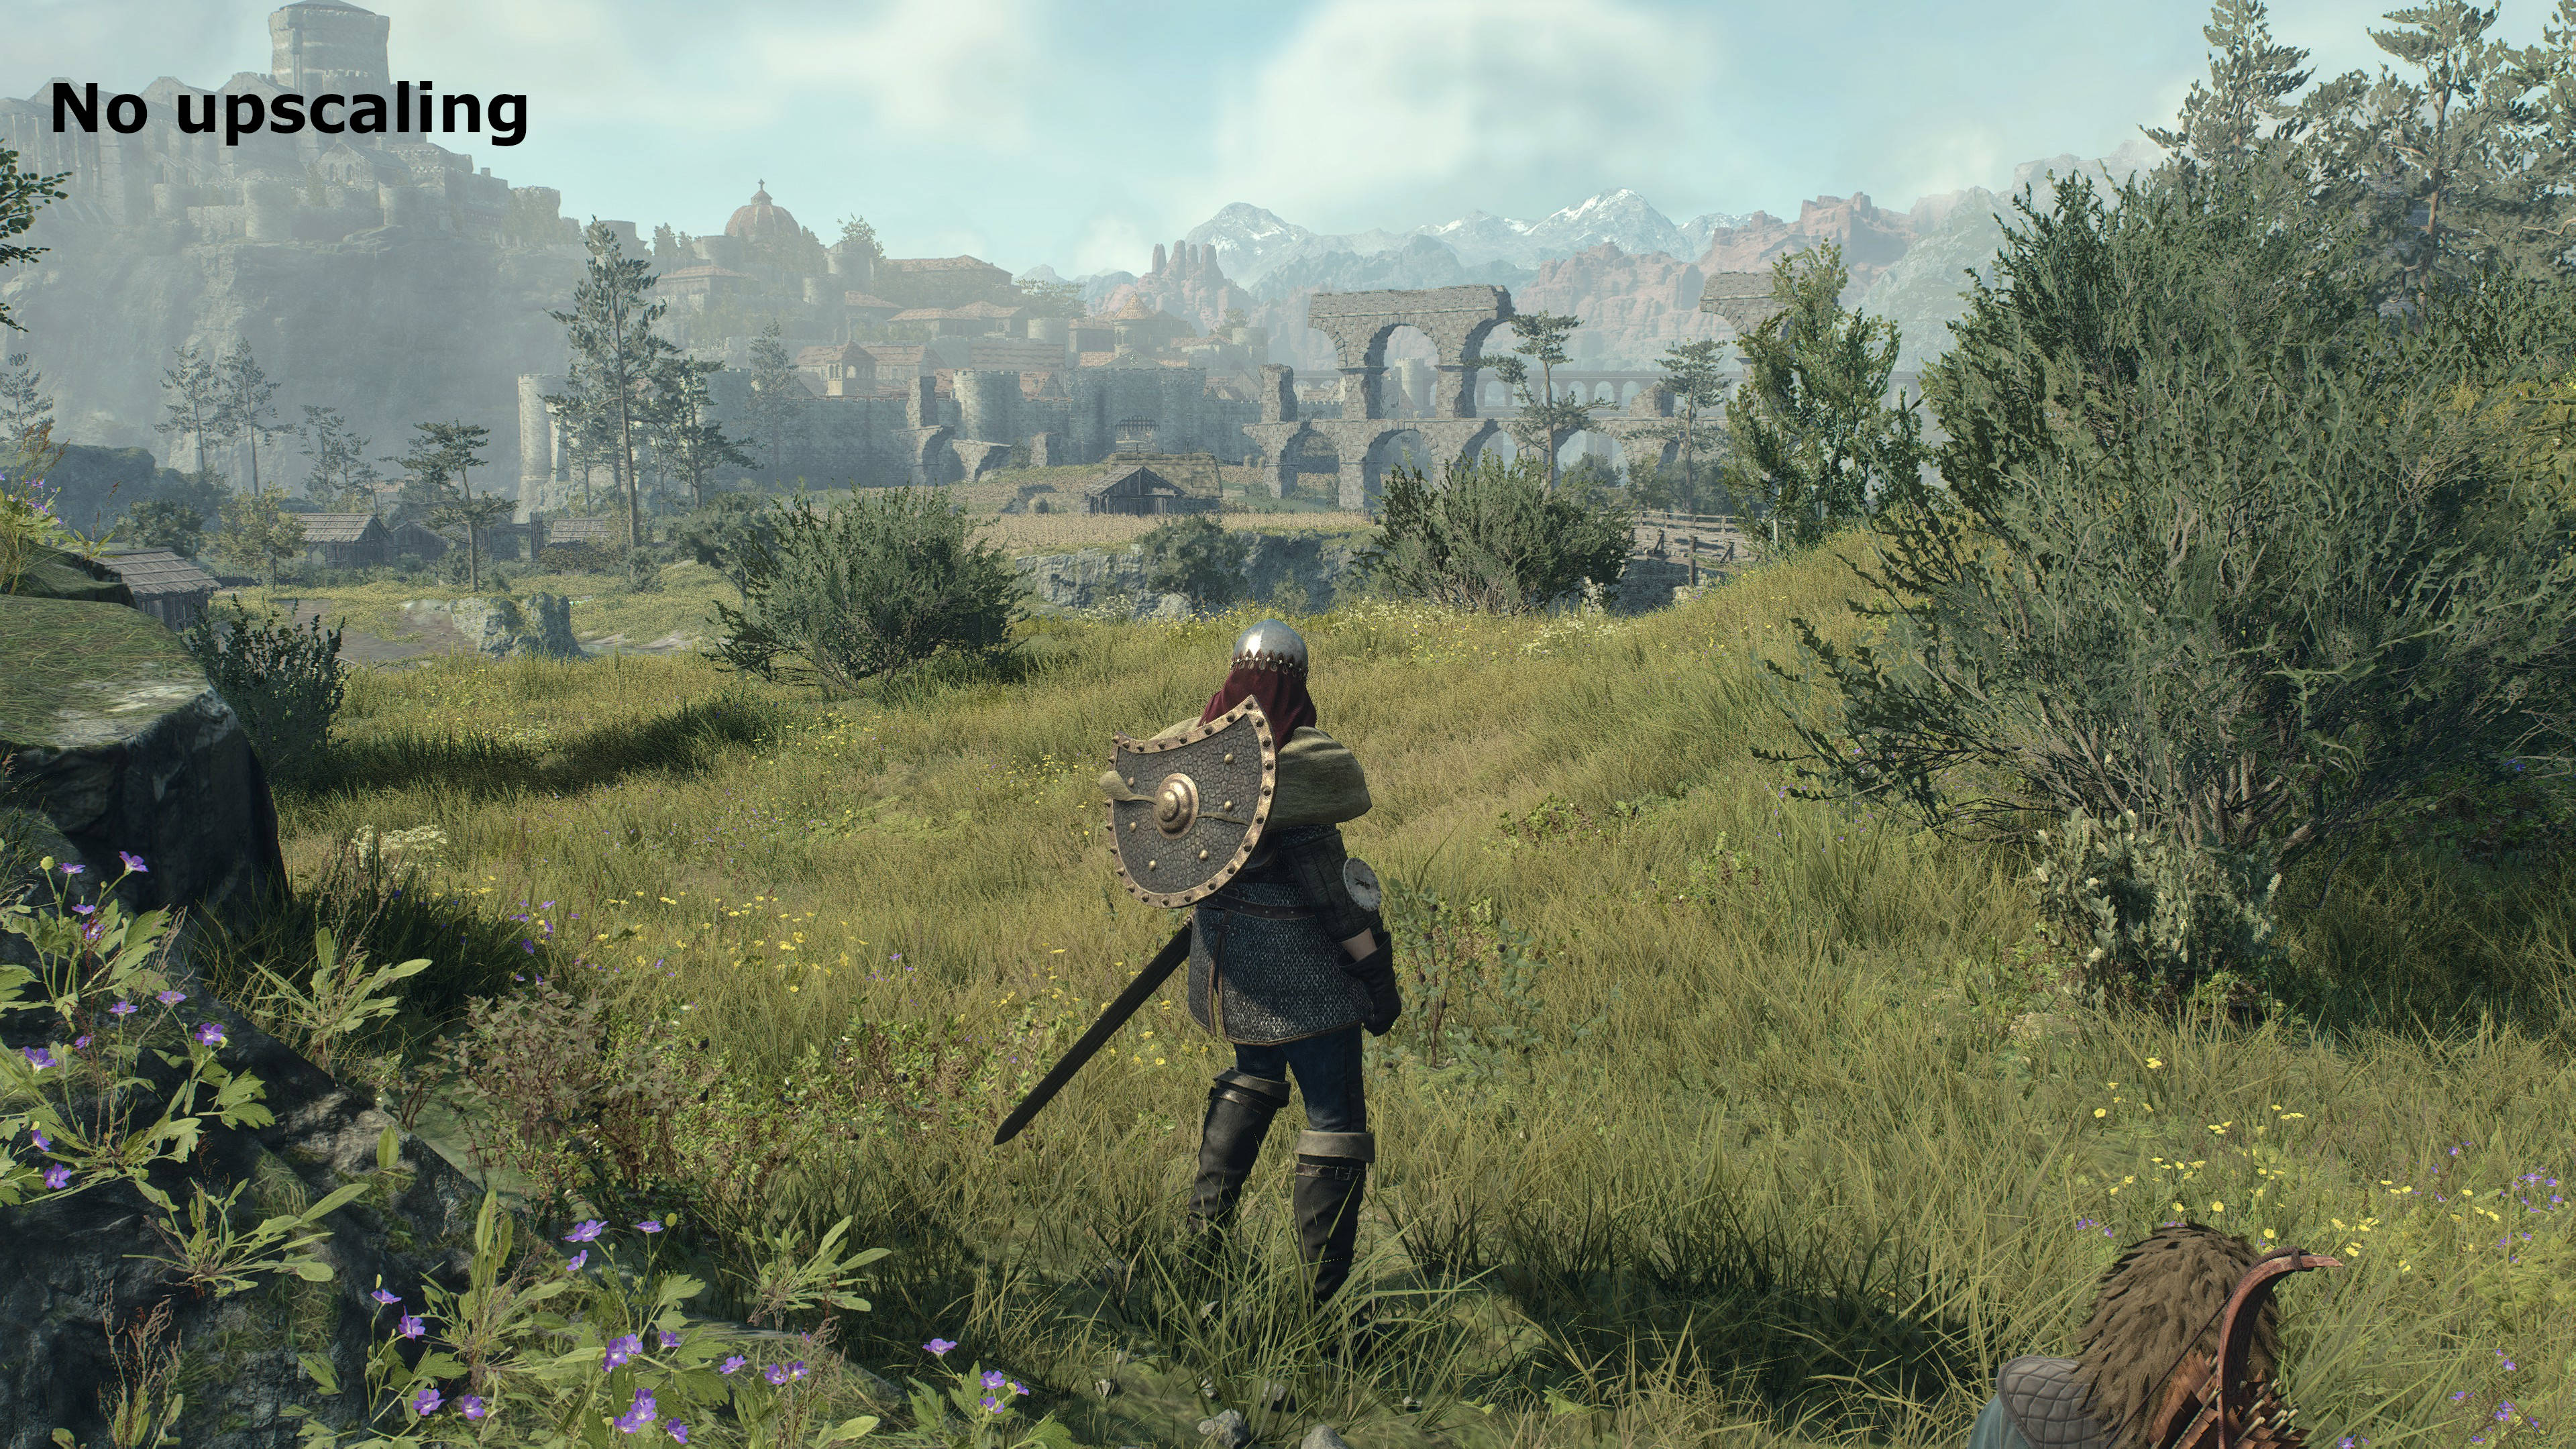 Screenshots of Dragon's Dogma 2, showing an open world view, with a buildings and mountains in the distance